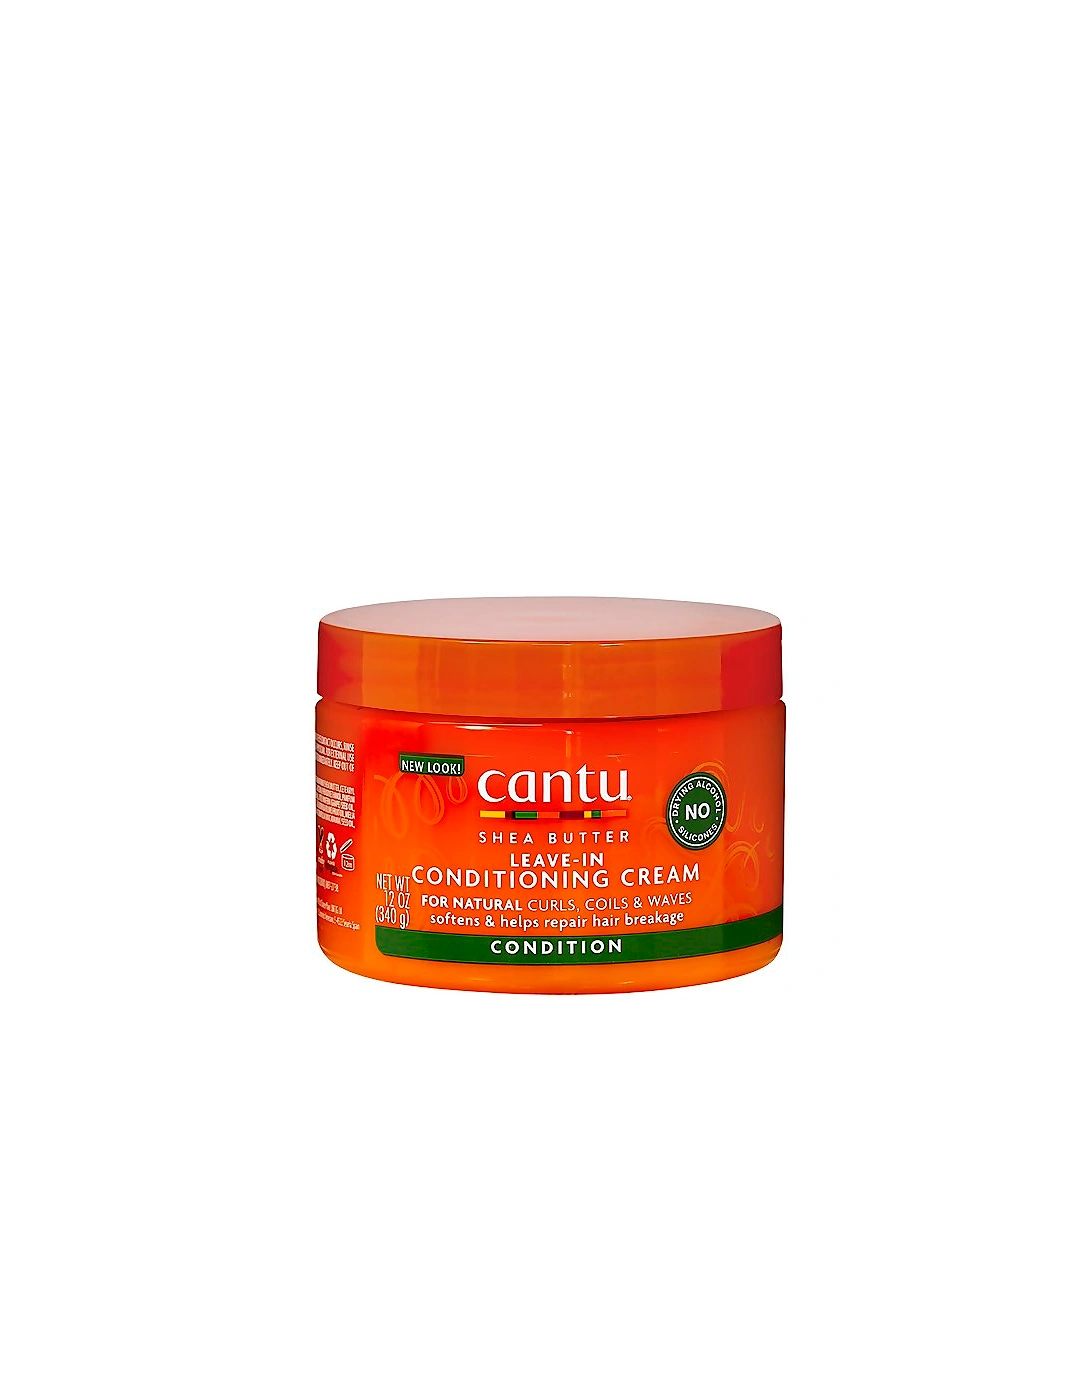 Natural Leave-In Conditioning Cream 340g - Cantu, 2 of 1